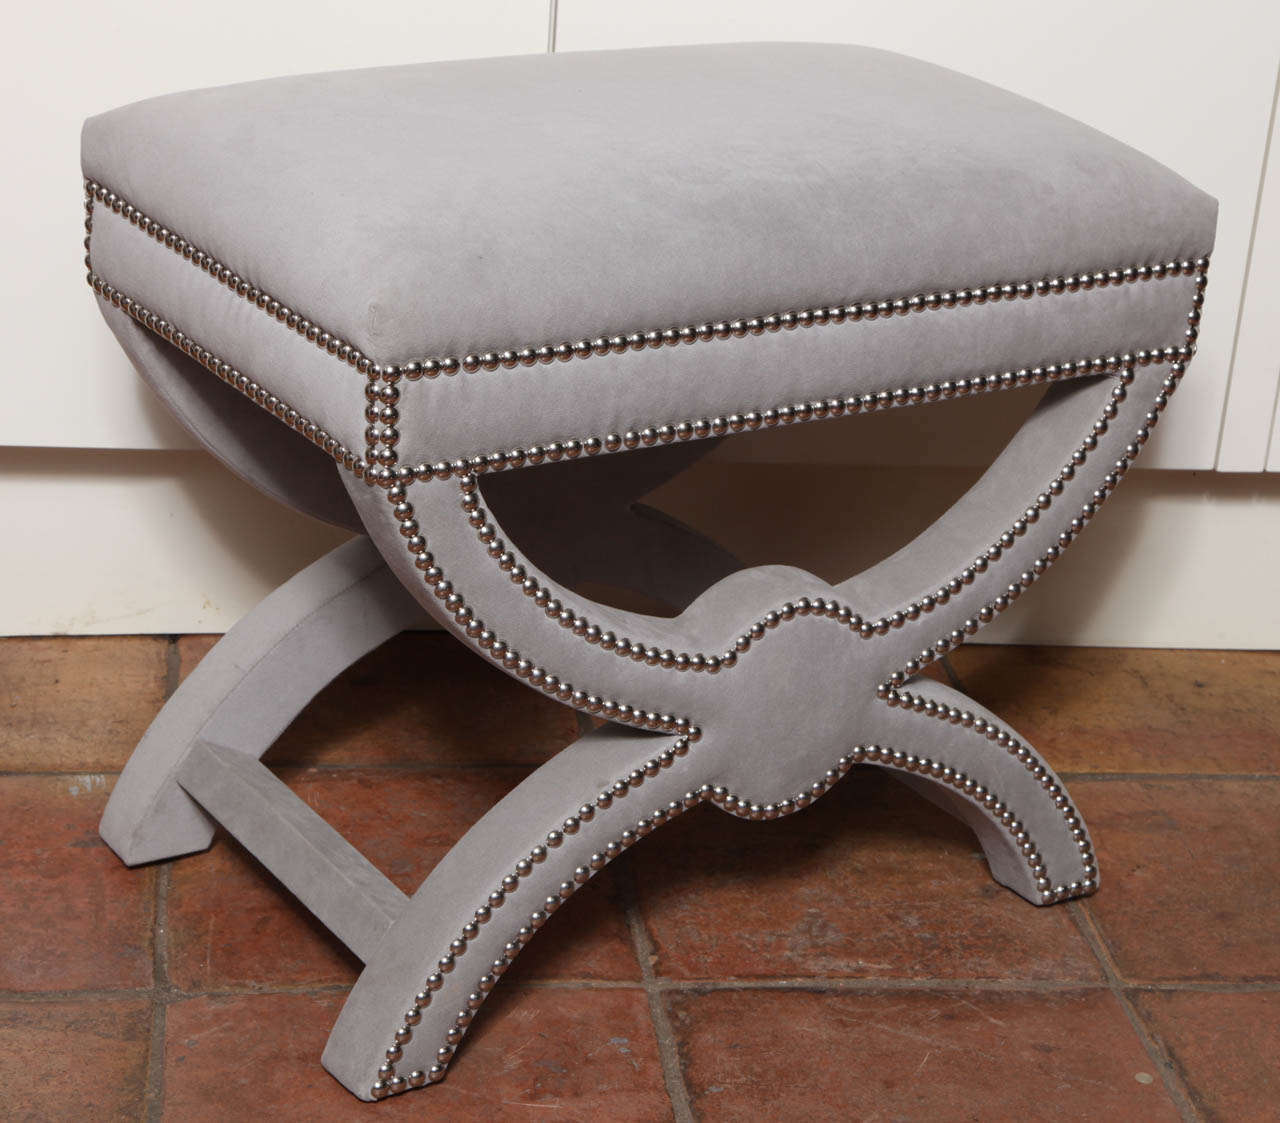 The classical ottoman is small, rectangular and comfortable. The piece is handmade. The chrome nail heads makes the classical lines more pronounced.
The ultraswuede grey textile gives the ottoman a neutral palette that is welcome in every style.